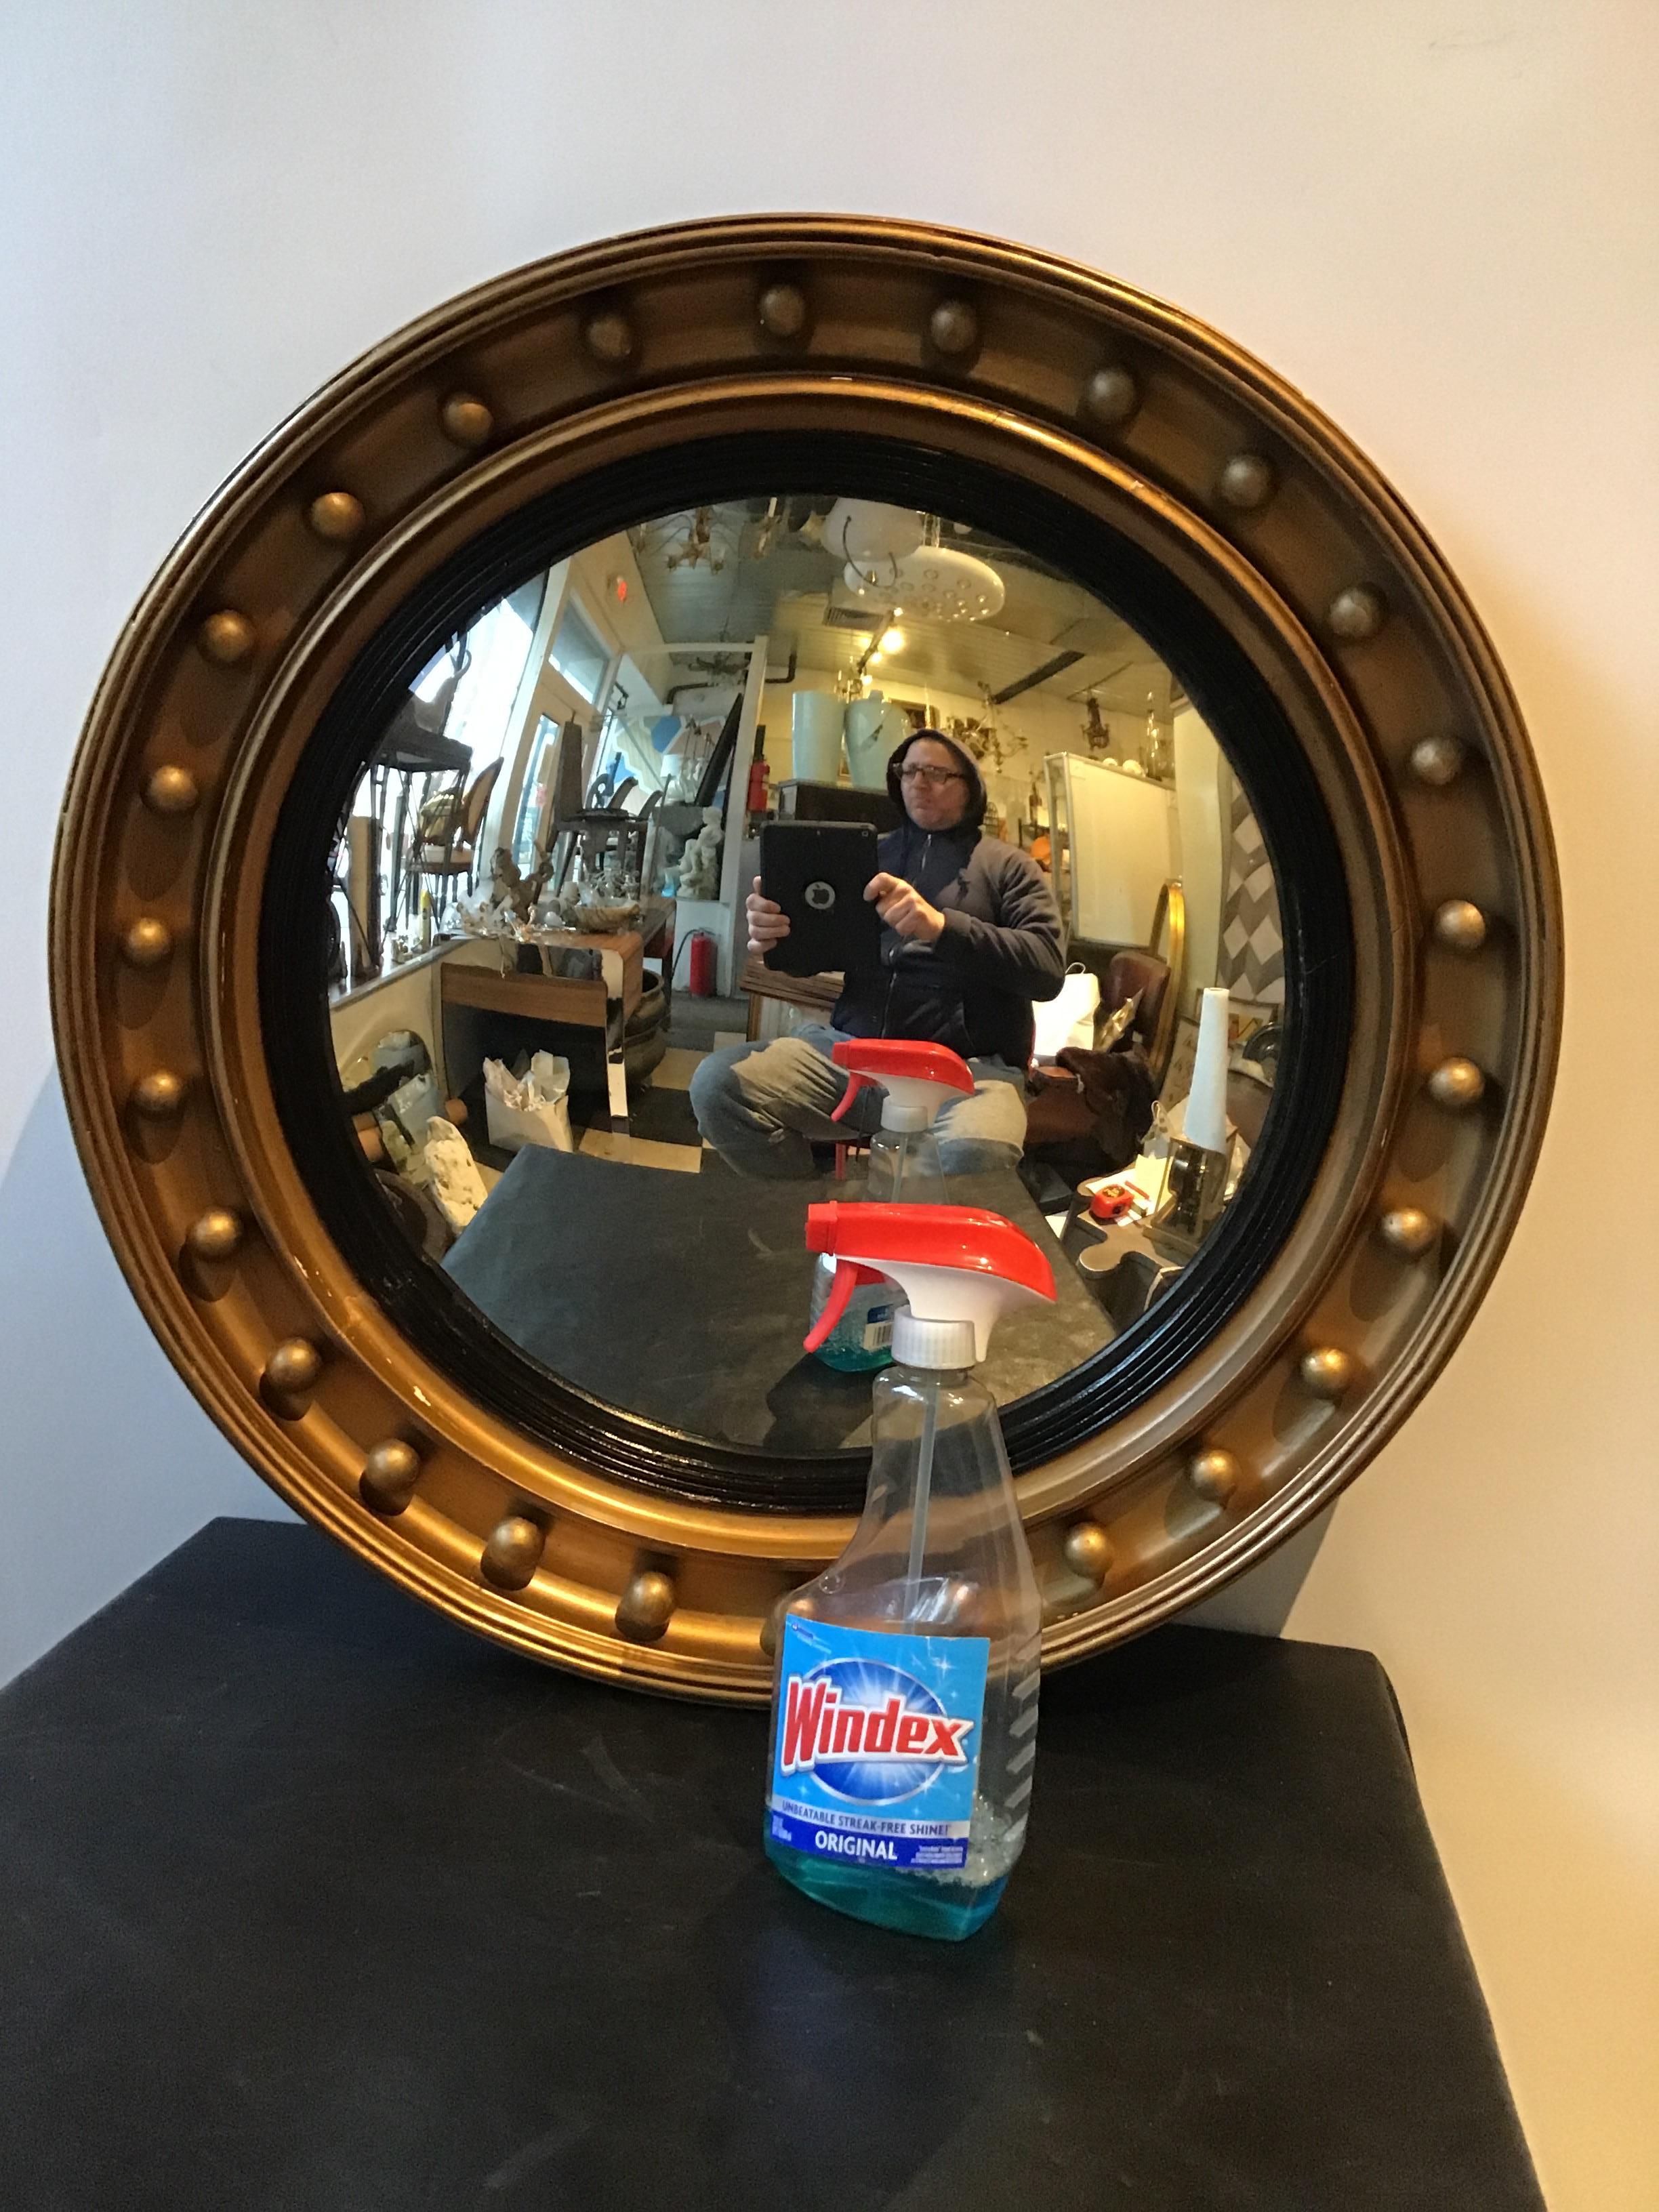 1870s federal circular convex mirror. Mirror is painted gold. This mirror can be shipped through UPS.